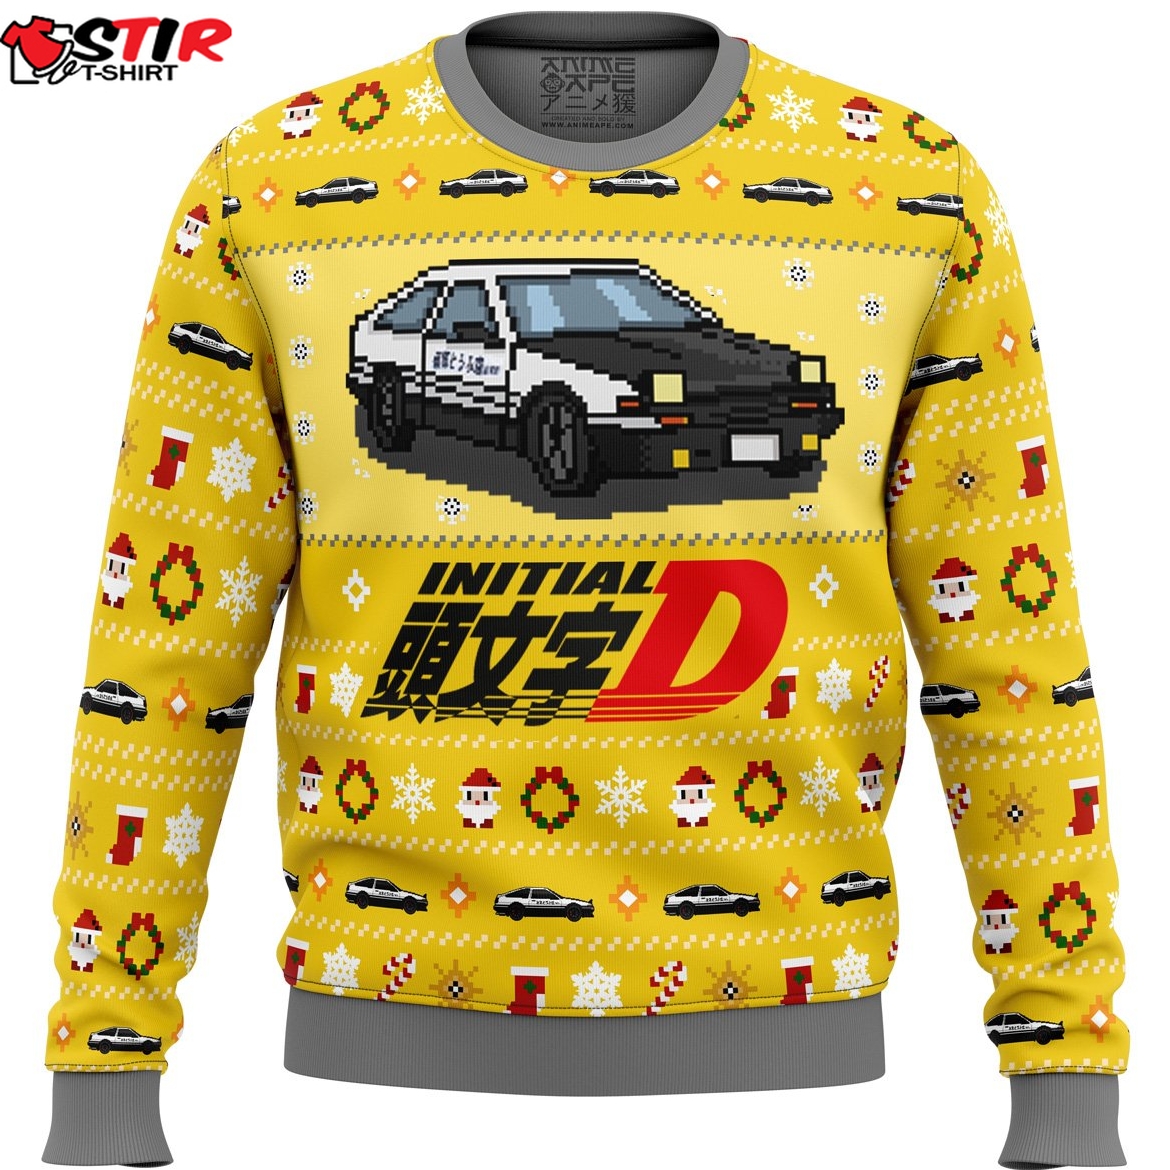 Initial D Classic Toyota Car Ugly Christmas Sweater Stirtshirt